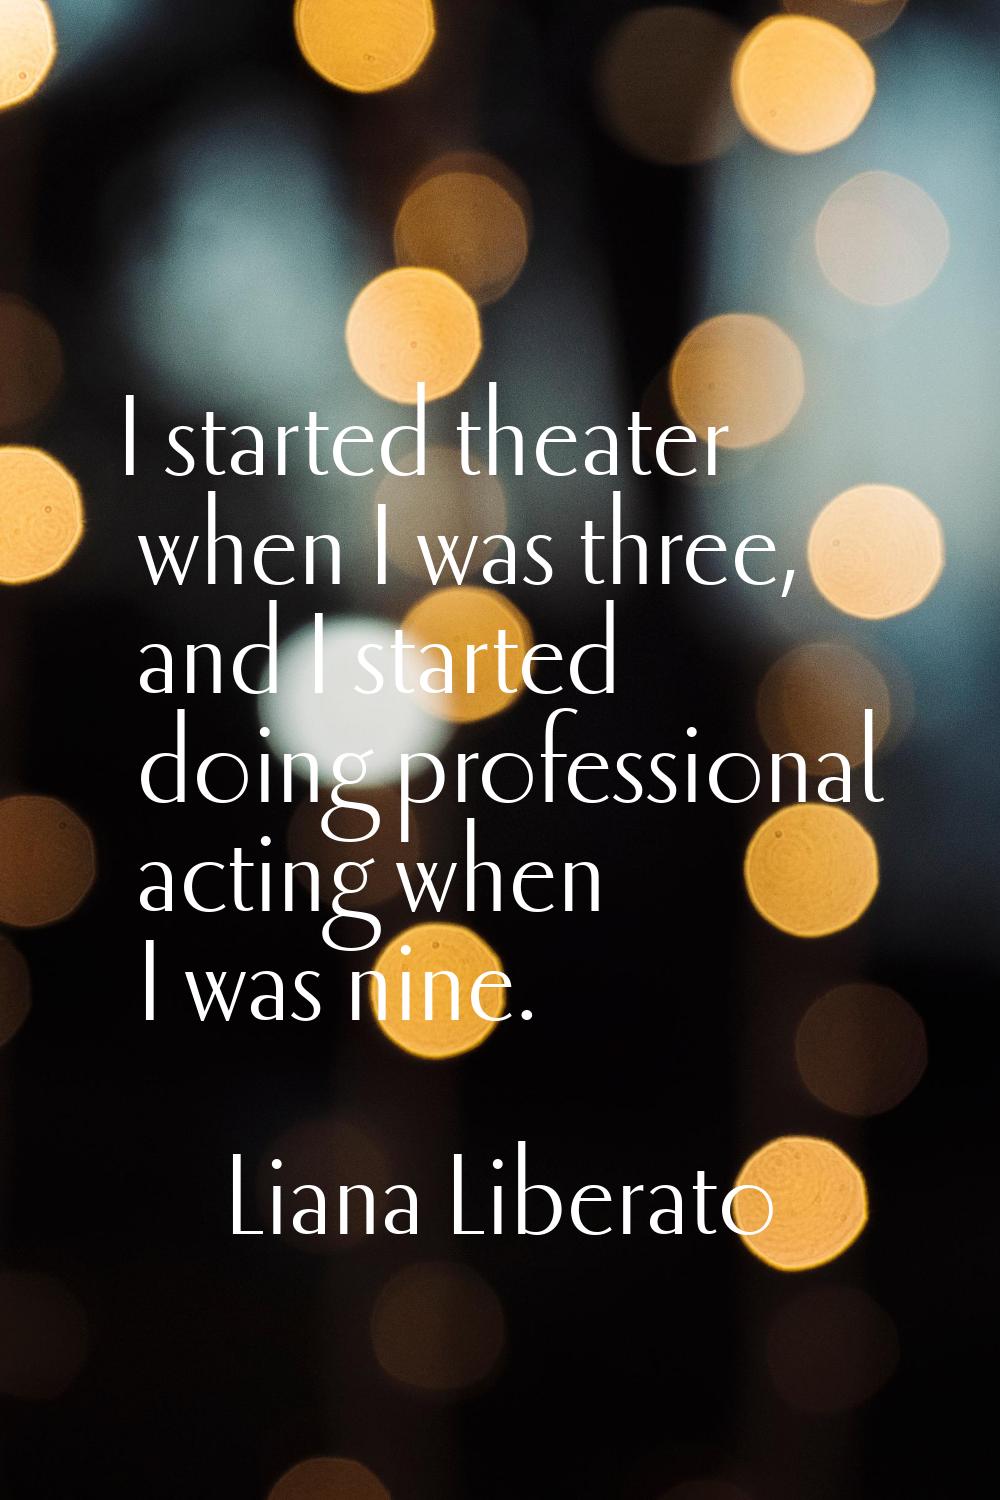 I started theater when I was three, and I started doing professional acting when I was nine.